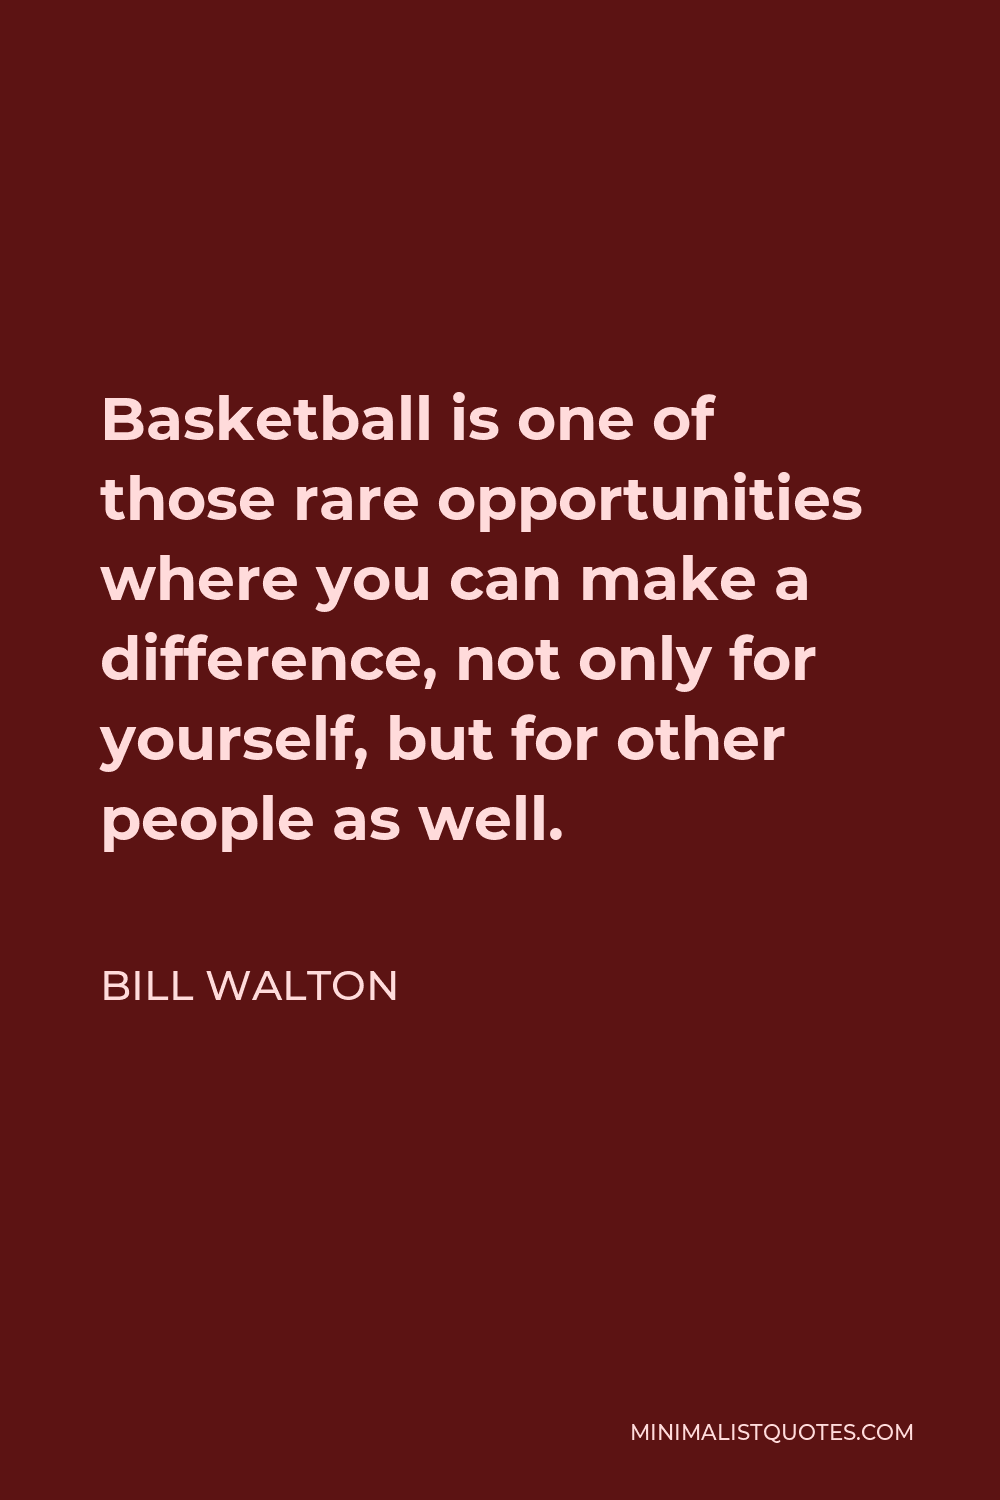 Bill Walton Quote - Basketball is one of those rare opportunities where you can make a difference, not only for yourself, but for other people as well.